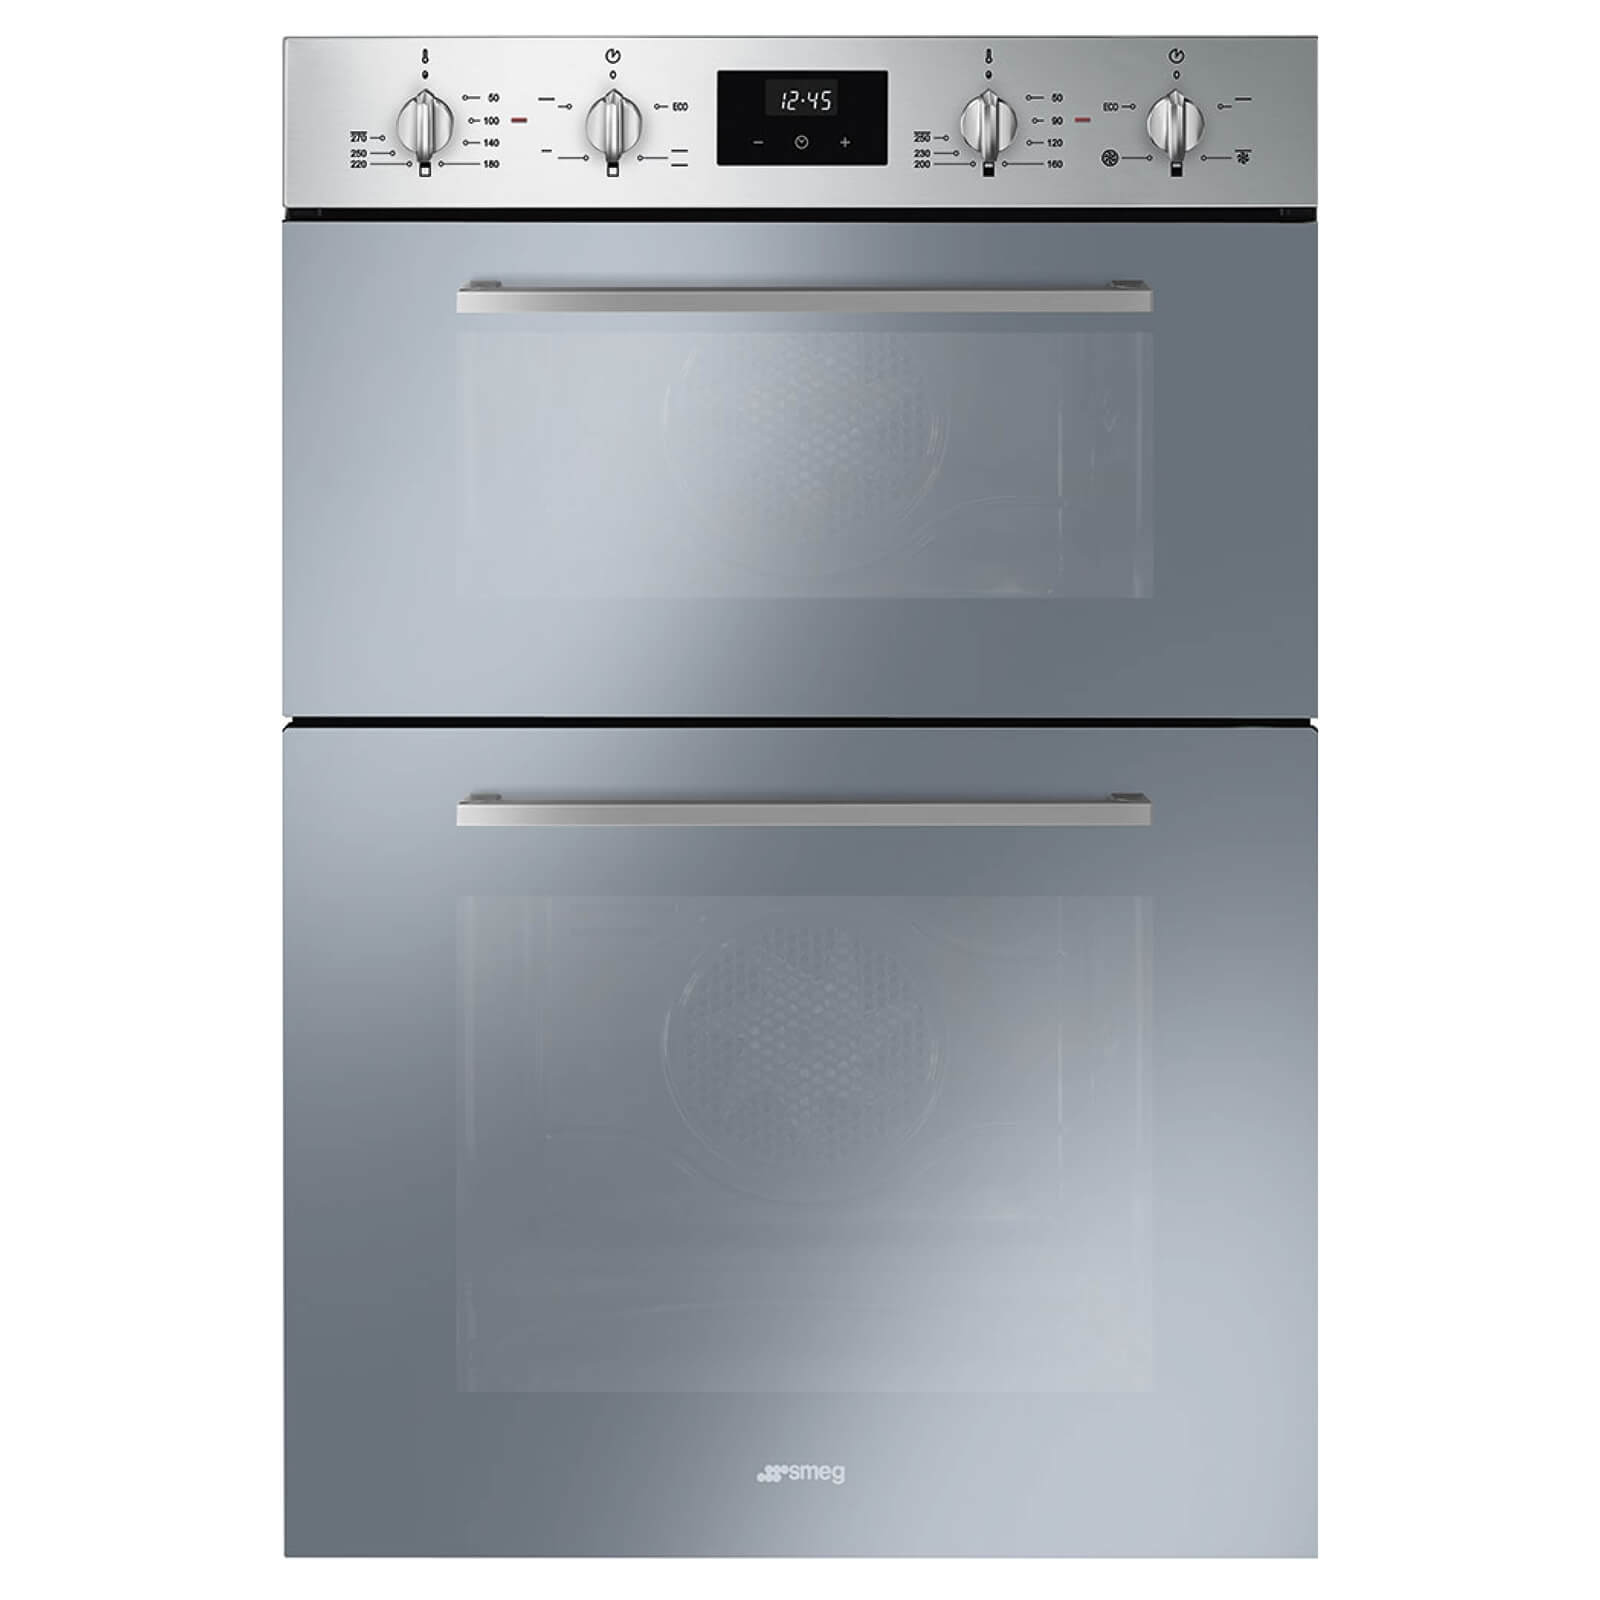 Smeg DOSF400S 60cm Cucina Stainless Steel and Silver Glass Double Multifunction Oven